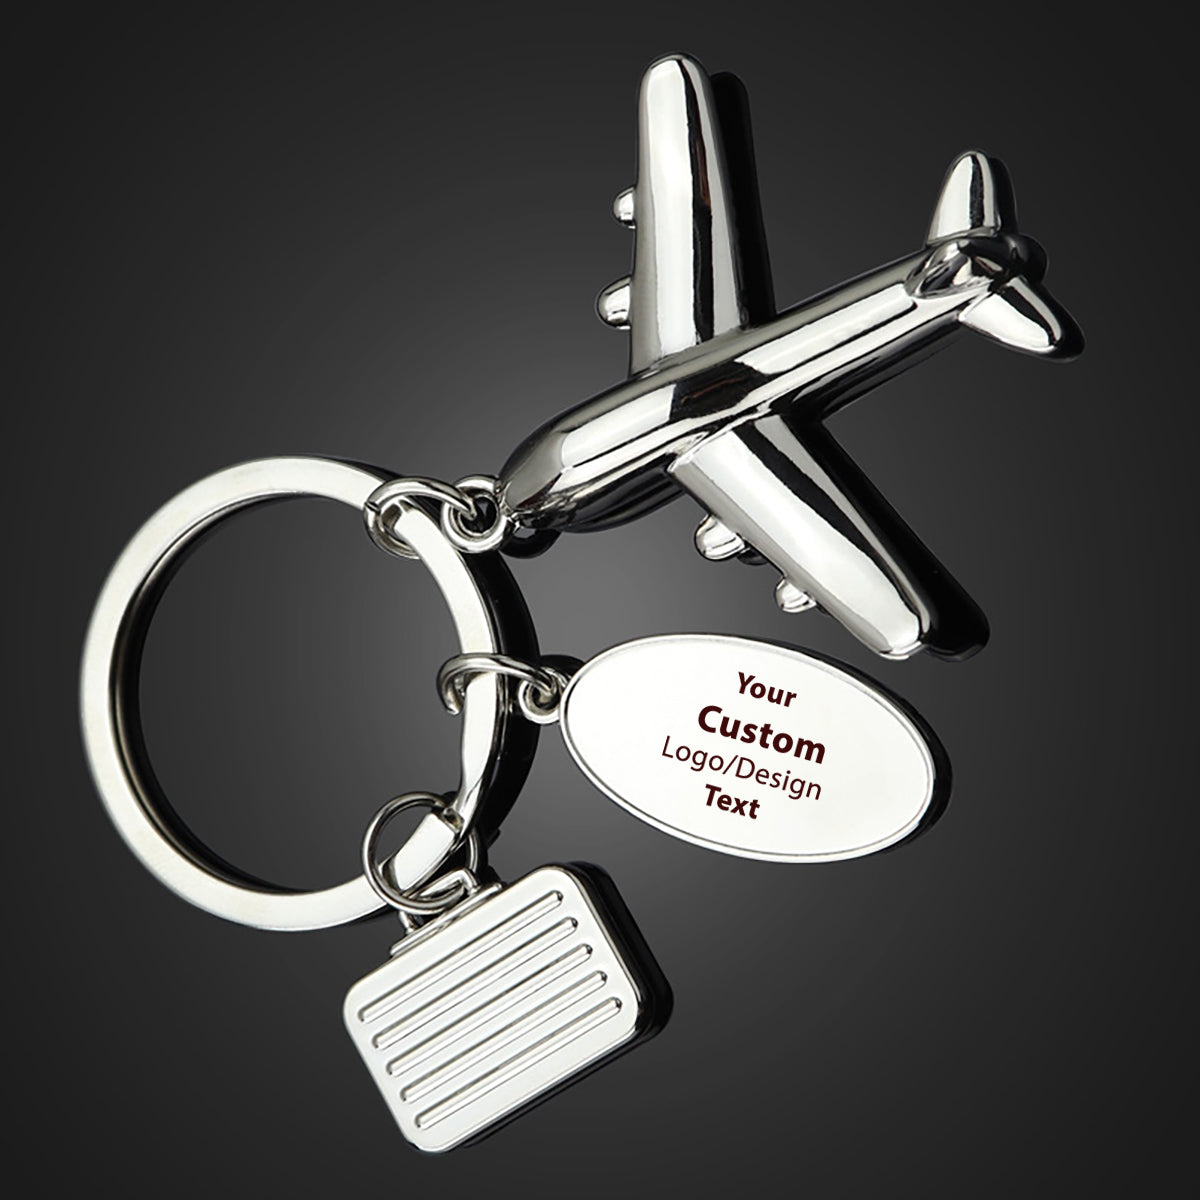 Your Custom Design & Image & Logo & Text Designed Suitcase Airplane Key Chains